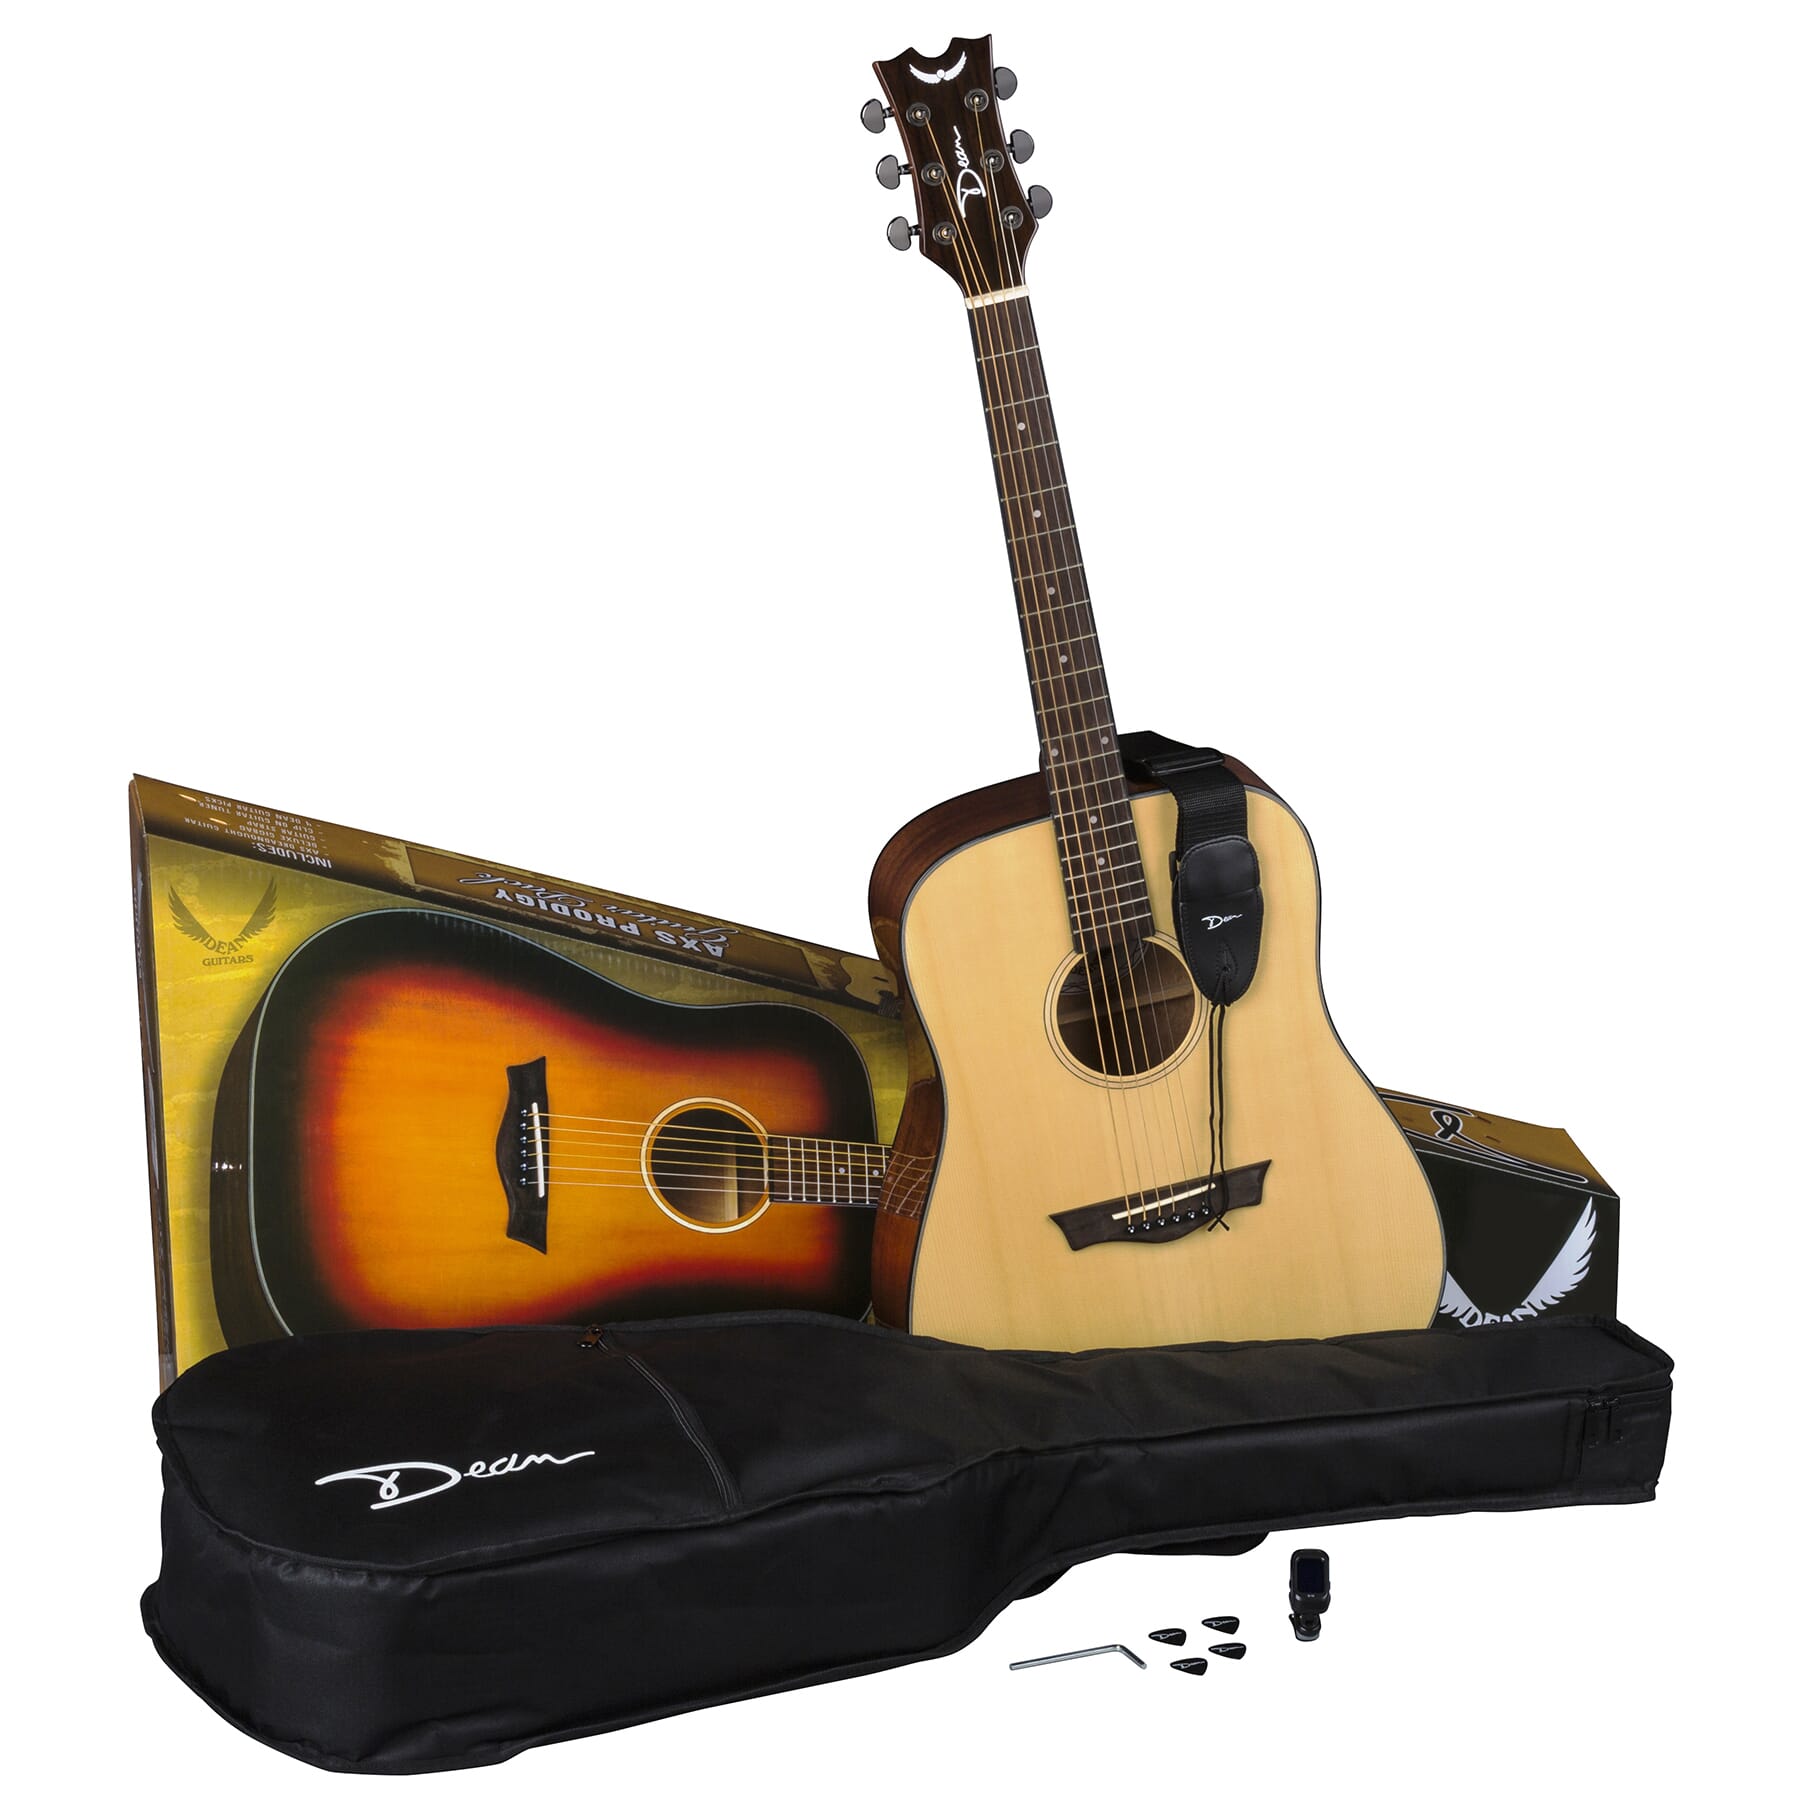 Dean AXS Prodigy Acoustic Package with case and accessories - Gloss Natural Finish